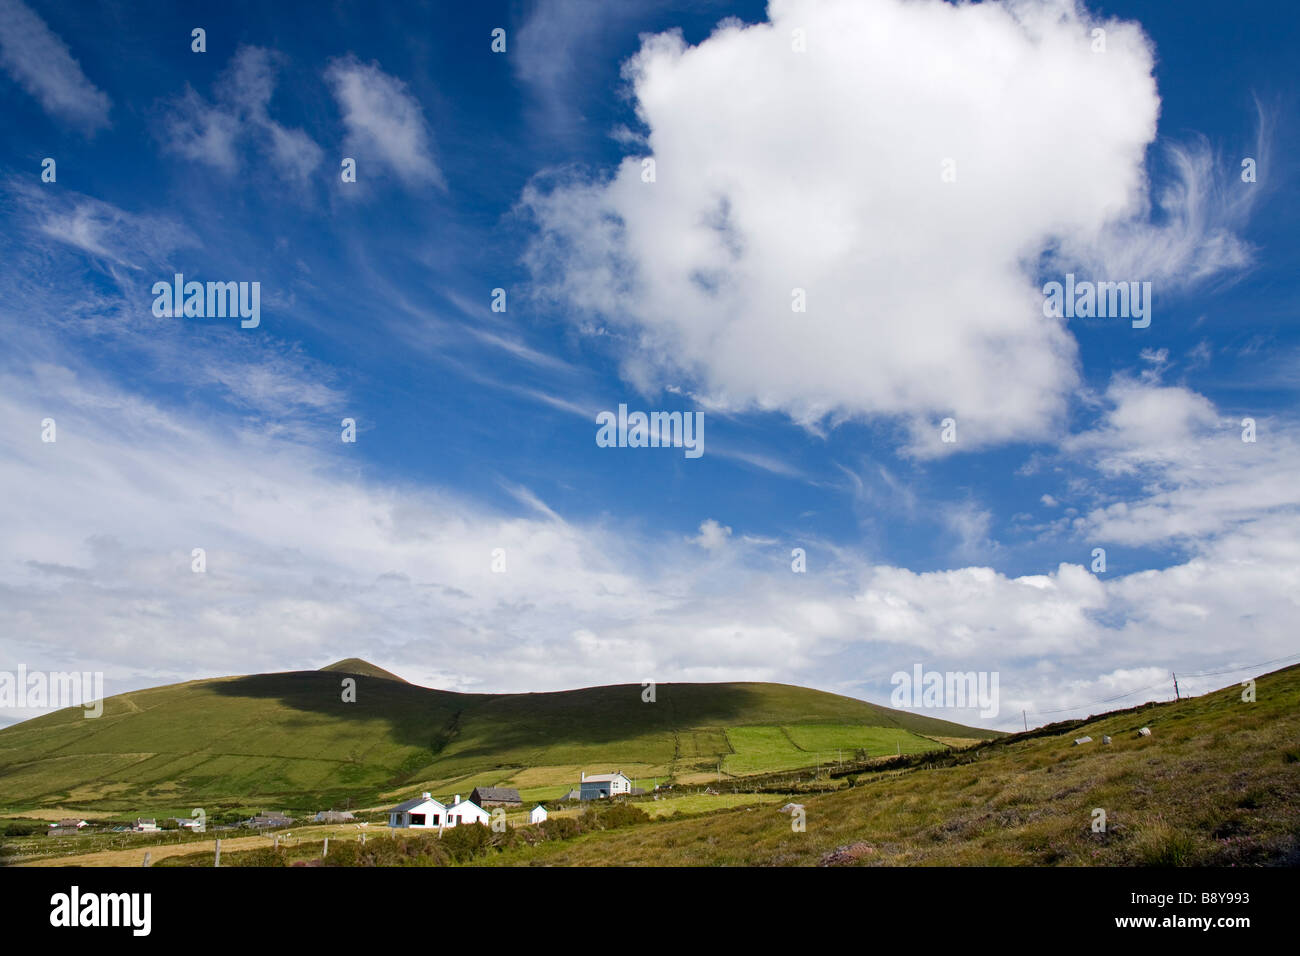 Clouds over a landscape, Clogher Head, Dingle Peninsula, County Kerry, Munster Province, Republic of Ireland Stock Photo